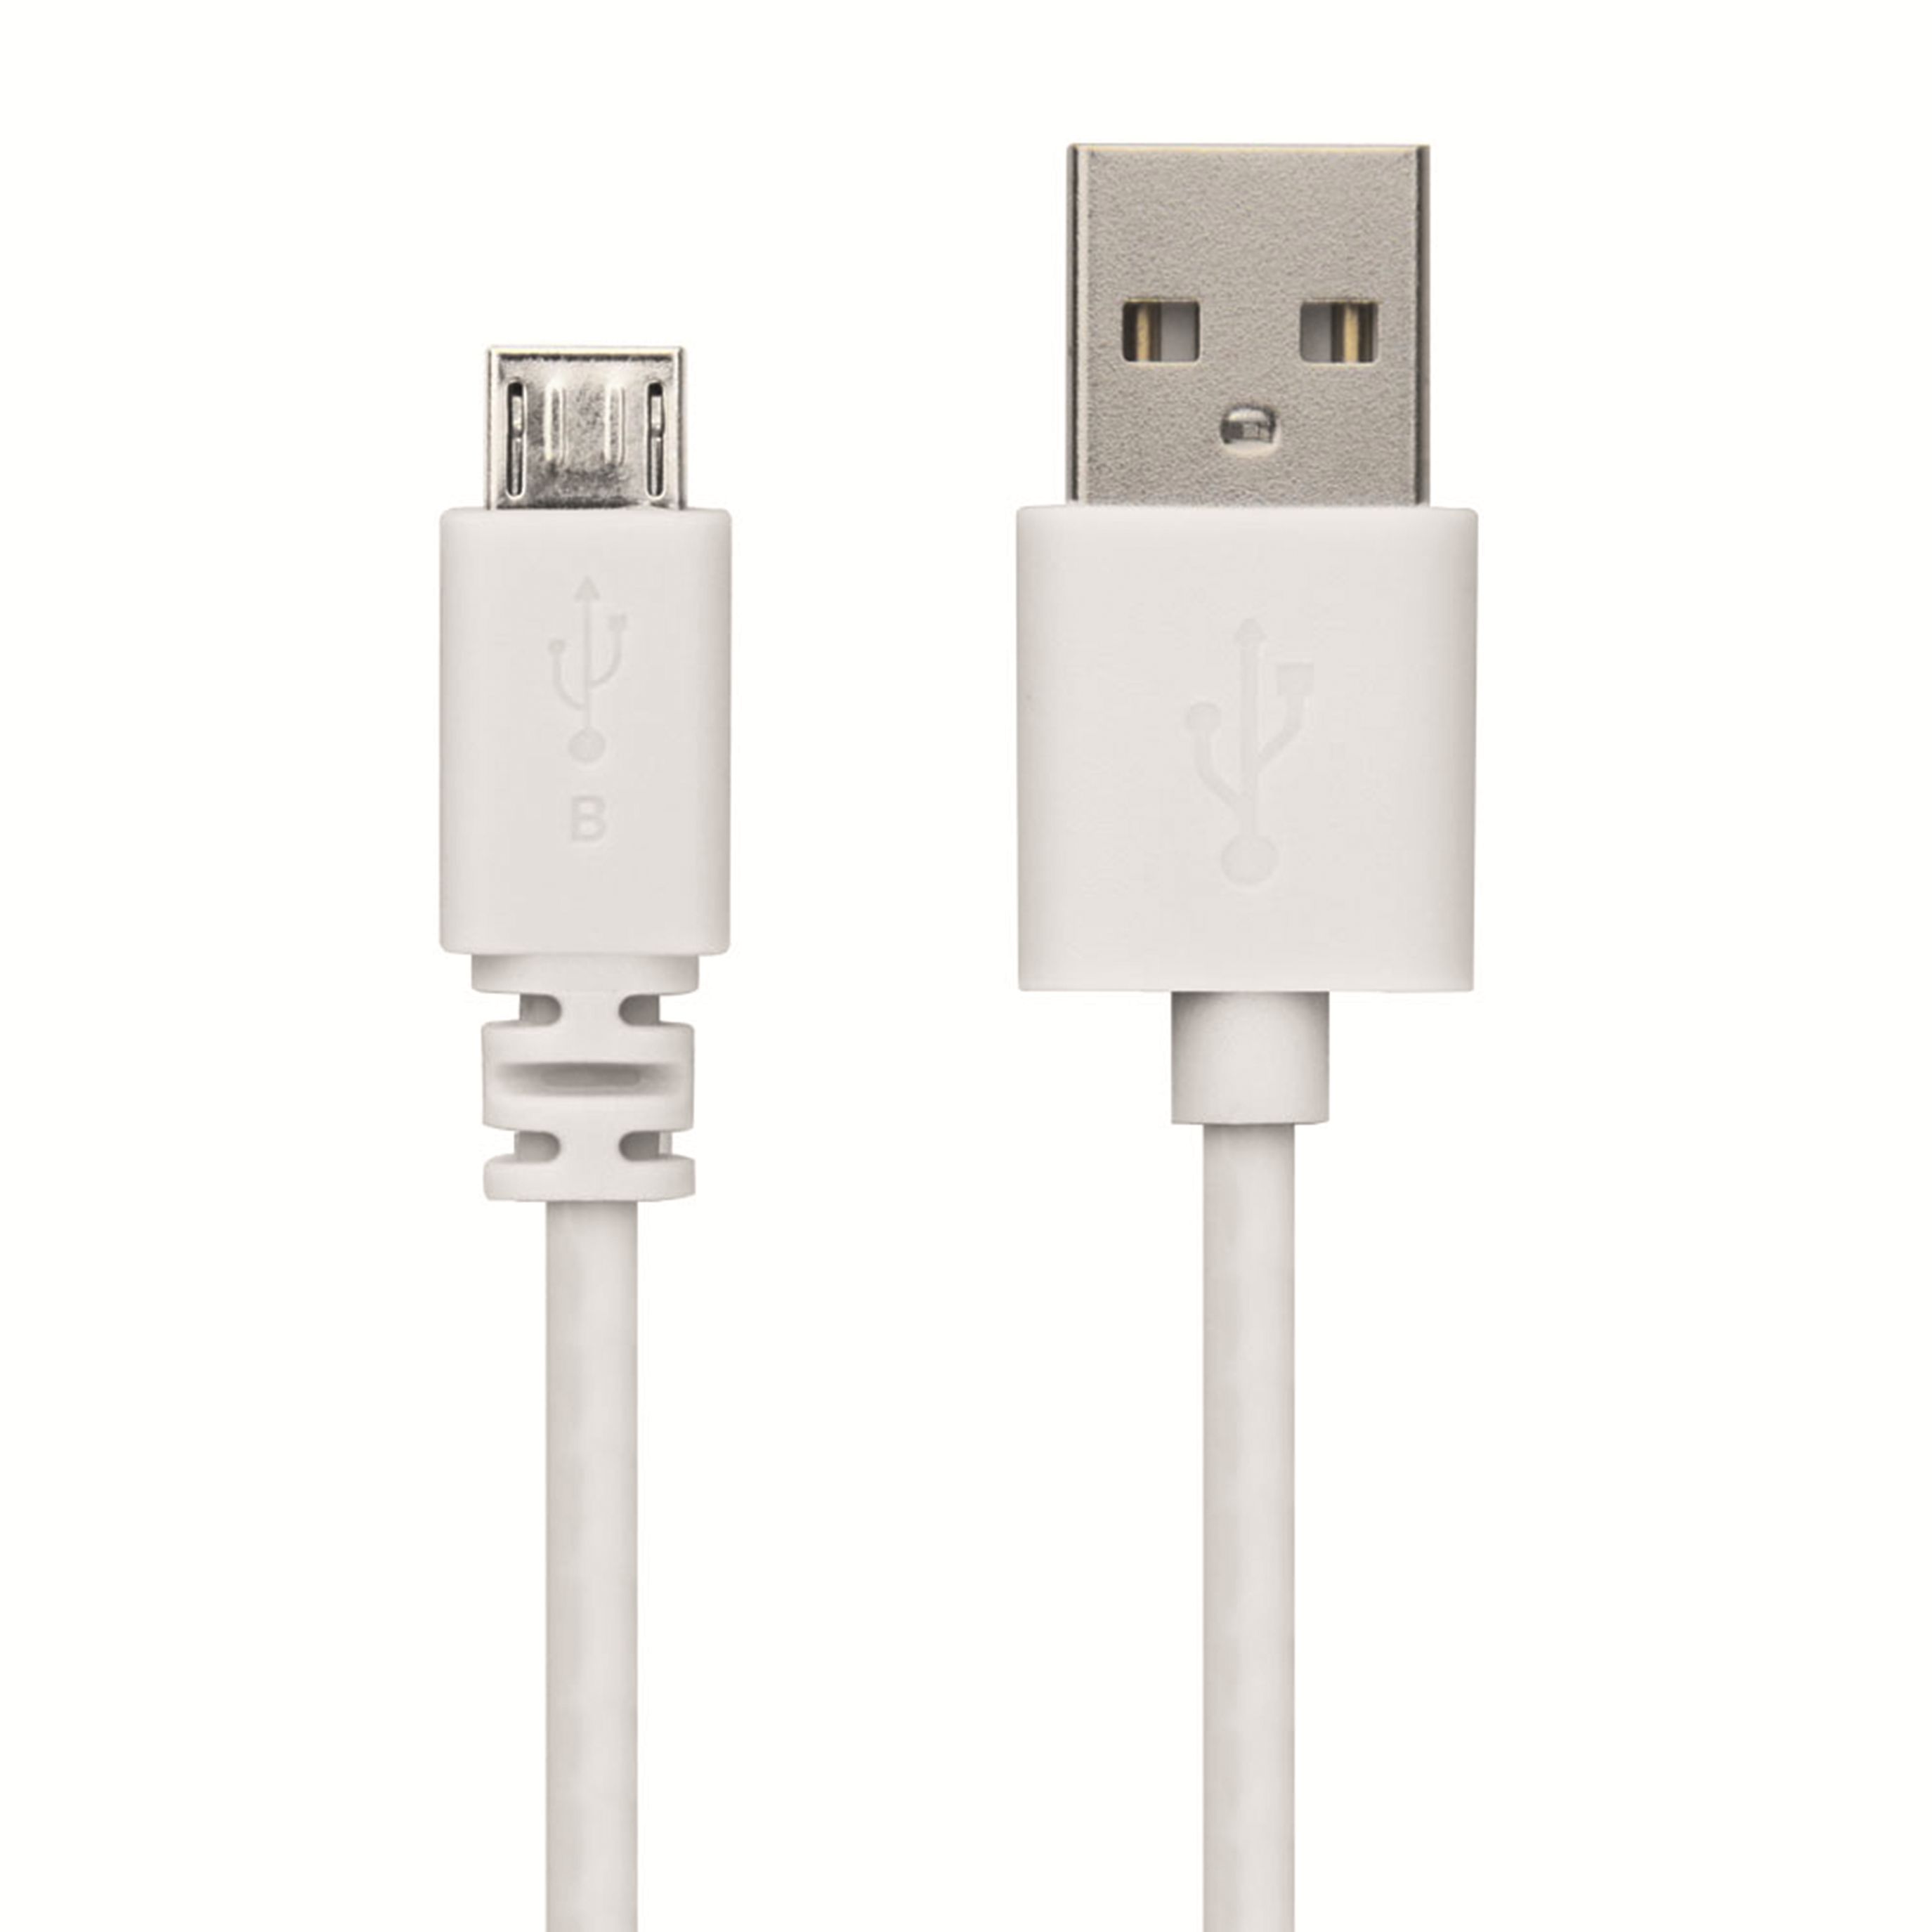 Snug Micro USB Cable - Avail in: White